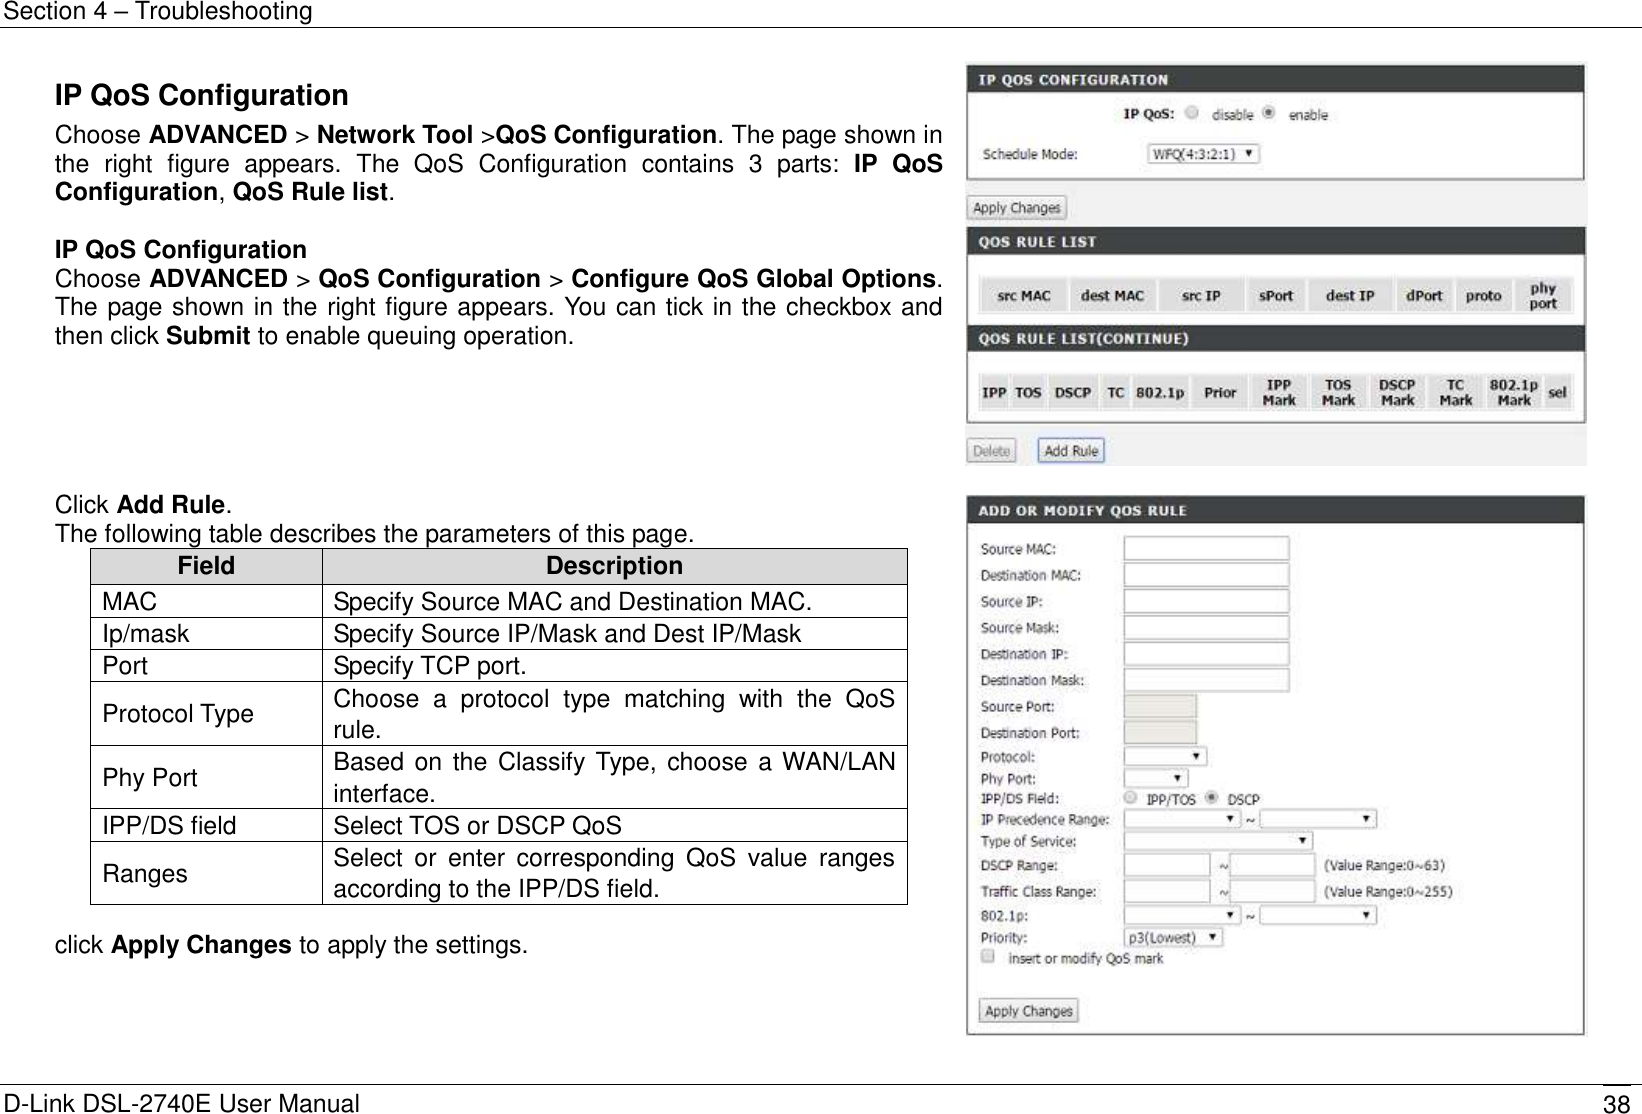 Section 4 – Troubleshooting D-Link DSL-2740E User Manual 38 IP QoS Configuration Choose ADVANCED &gt; Network Tool &gt;QoS Configuration. The page shown in the  right  figure  appears.  The  QoS  Configuration  contains  3  parts:  IP  QoS Configuration, QoS Rule list.  IP QoS Configuration   Choose ADVANCED &gt; QoS Configuration &gt; Configure QoS Global Options. The page shown in the right figure appears. You can tick in the checkbox and then click Submit to enable queuing operation.    Click Add Rule. The following table describes the parameters of this page. Field Description MAC   Specify Source MAC and Destination MAC. Ip/mask Specify Source IP/Mask and Dest IP/Mask Port Specify TCP port. Protocol Type Choose  a  protocol  type  matching  with  the  QoS rule. Phy Port Based on the Classify Type, choose a WAN/LAN interface. IPP/DS field Select TOS or DSCP QoS Ranges Select  or  enter  corresponding  QoS  value  ranges according to the IPP/DS field.  click Apply Changes to apply the settings.   